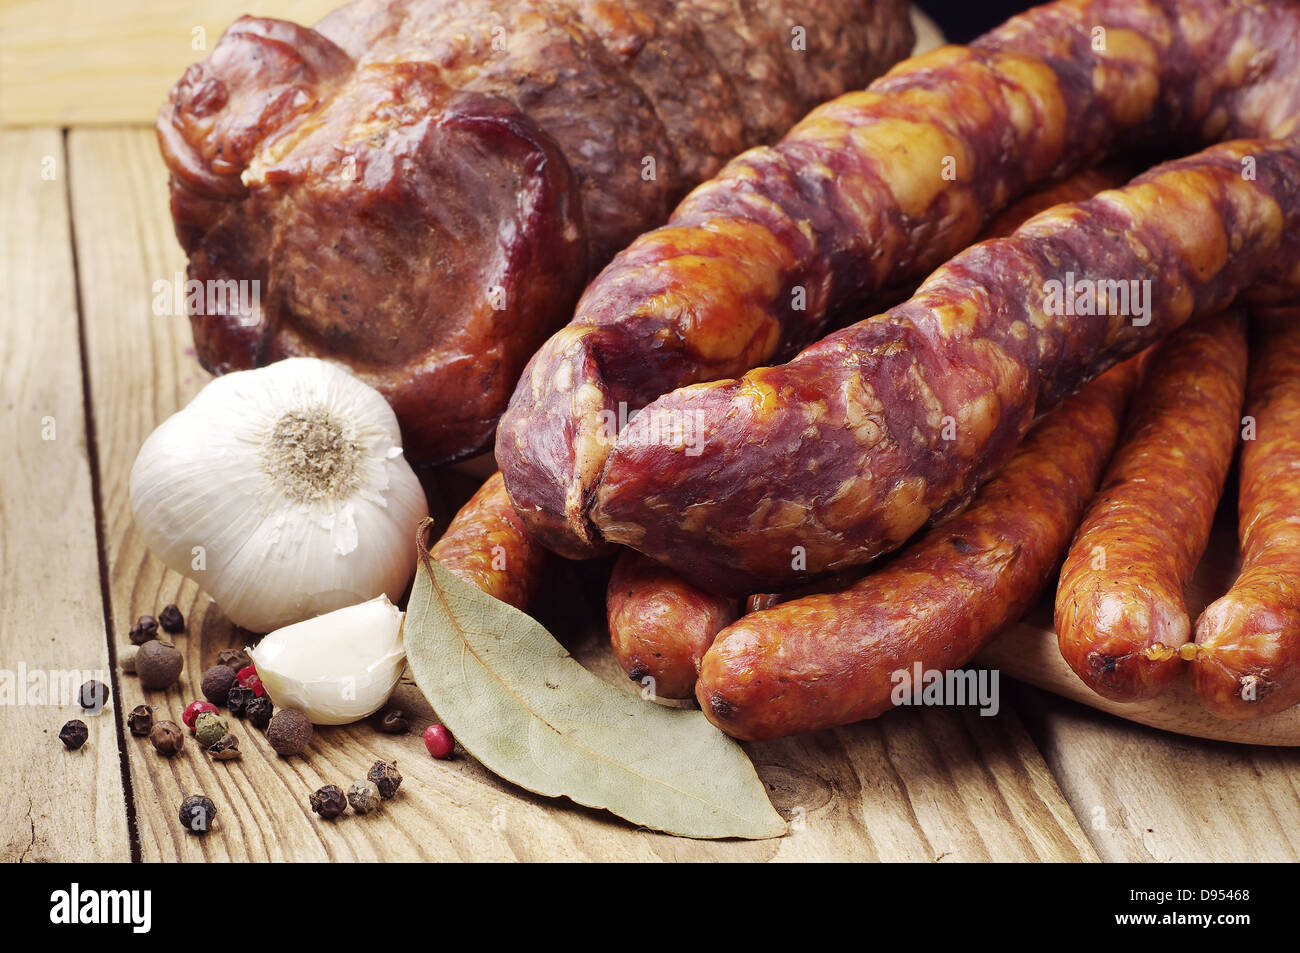 Different smoked sausage and meat on wooden table Stock Photo